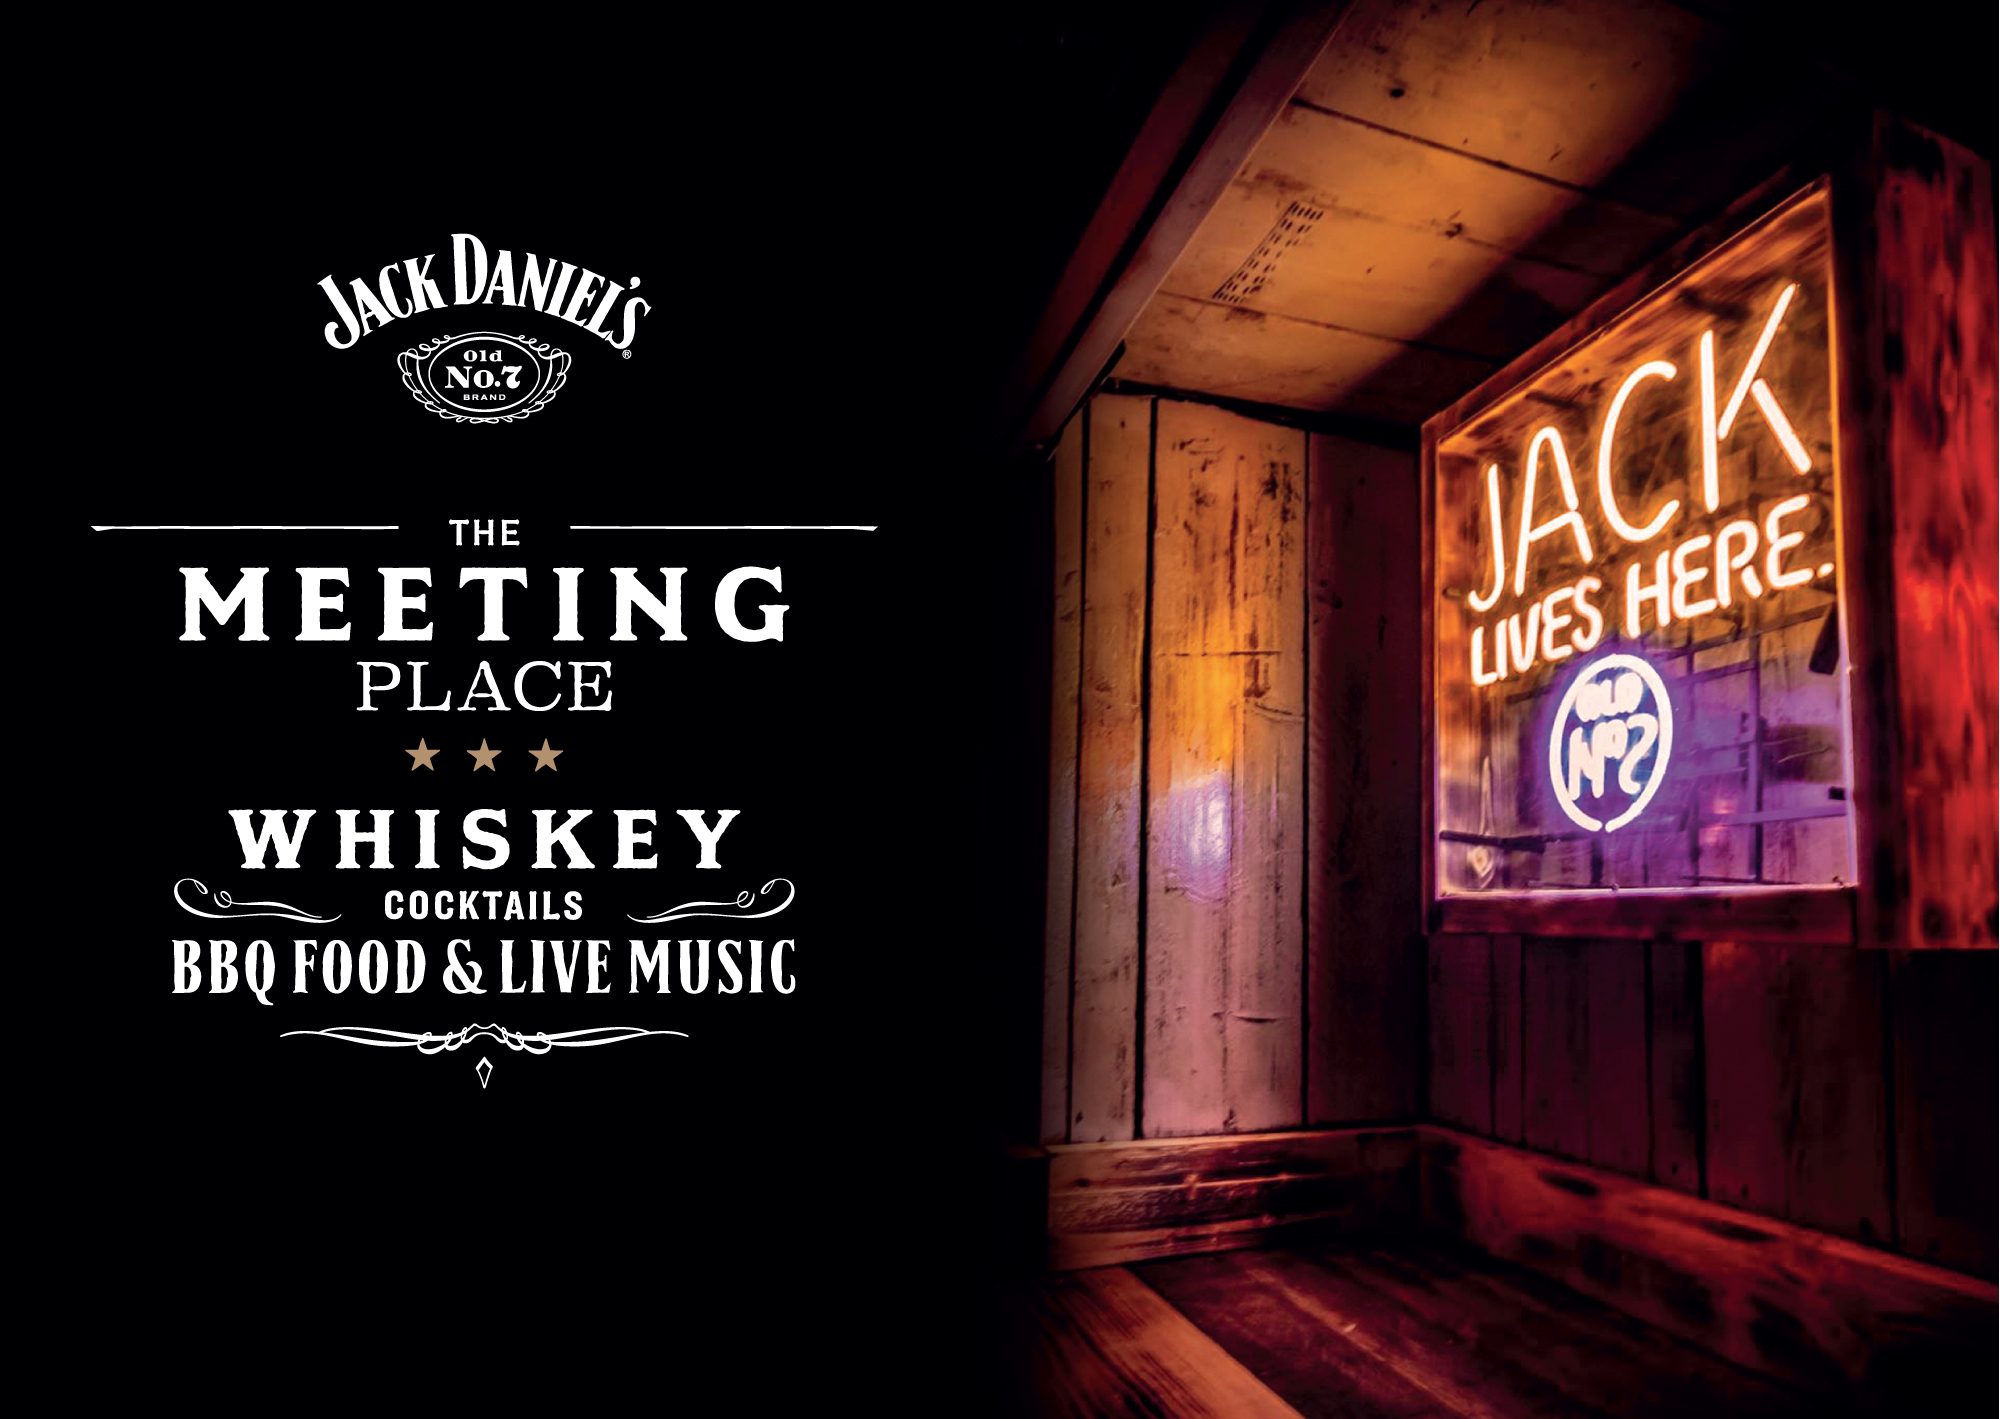 News: You don’t know Jack – yet. Jack Daniel’s is popping up with The Meeting Place